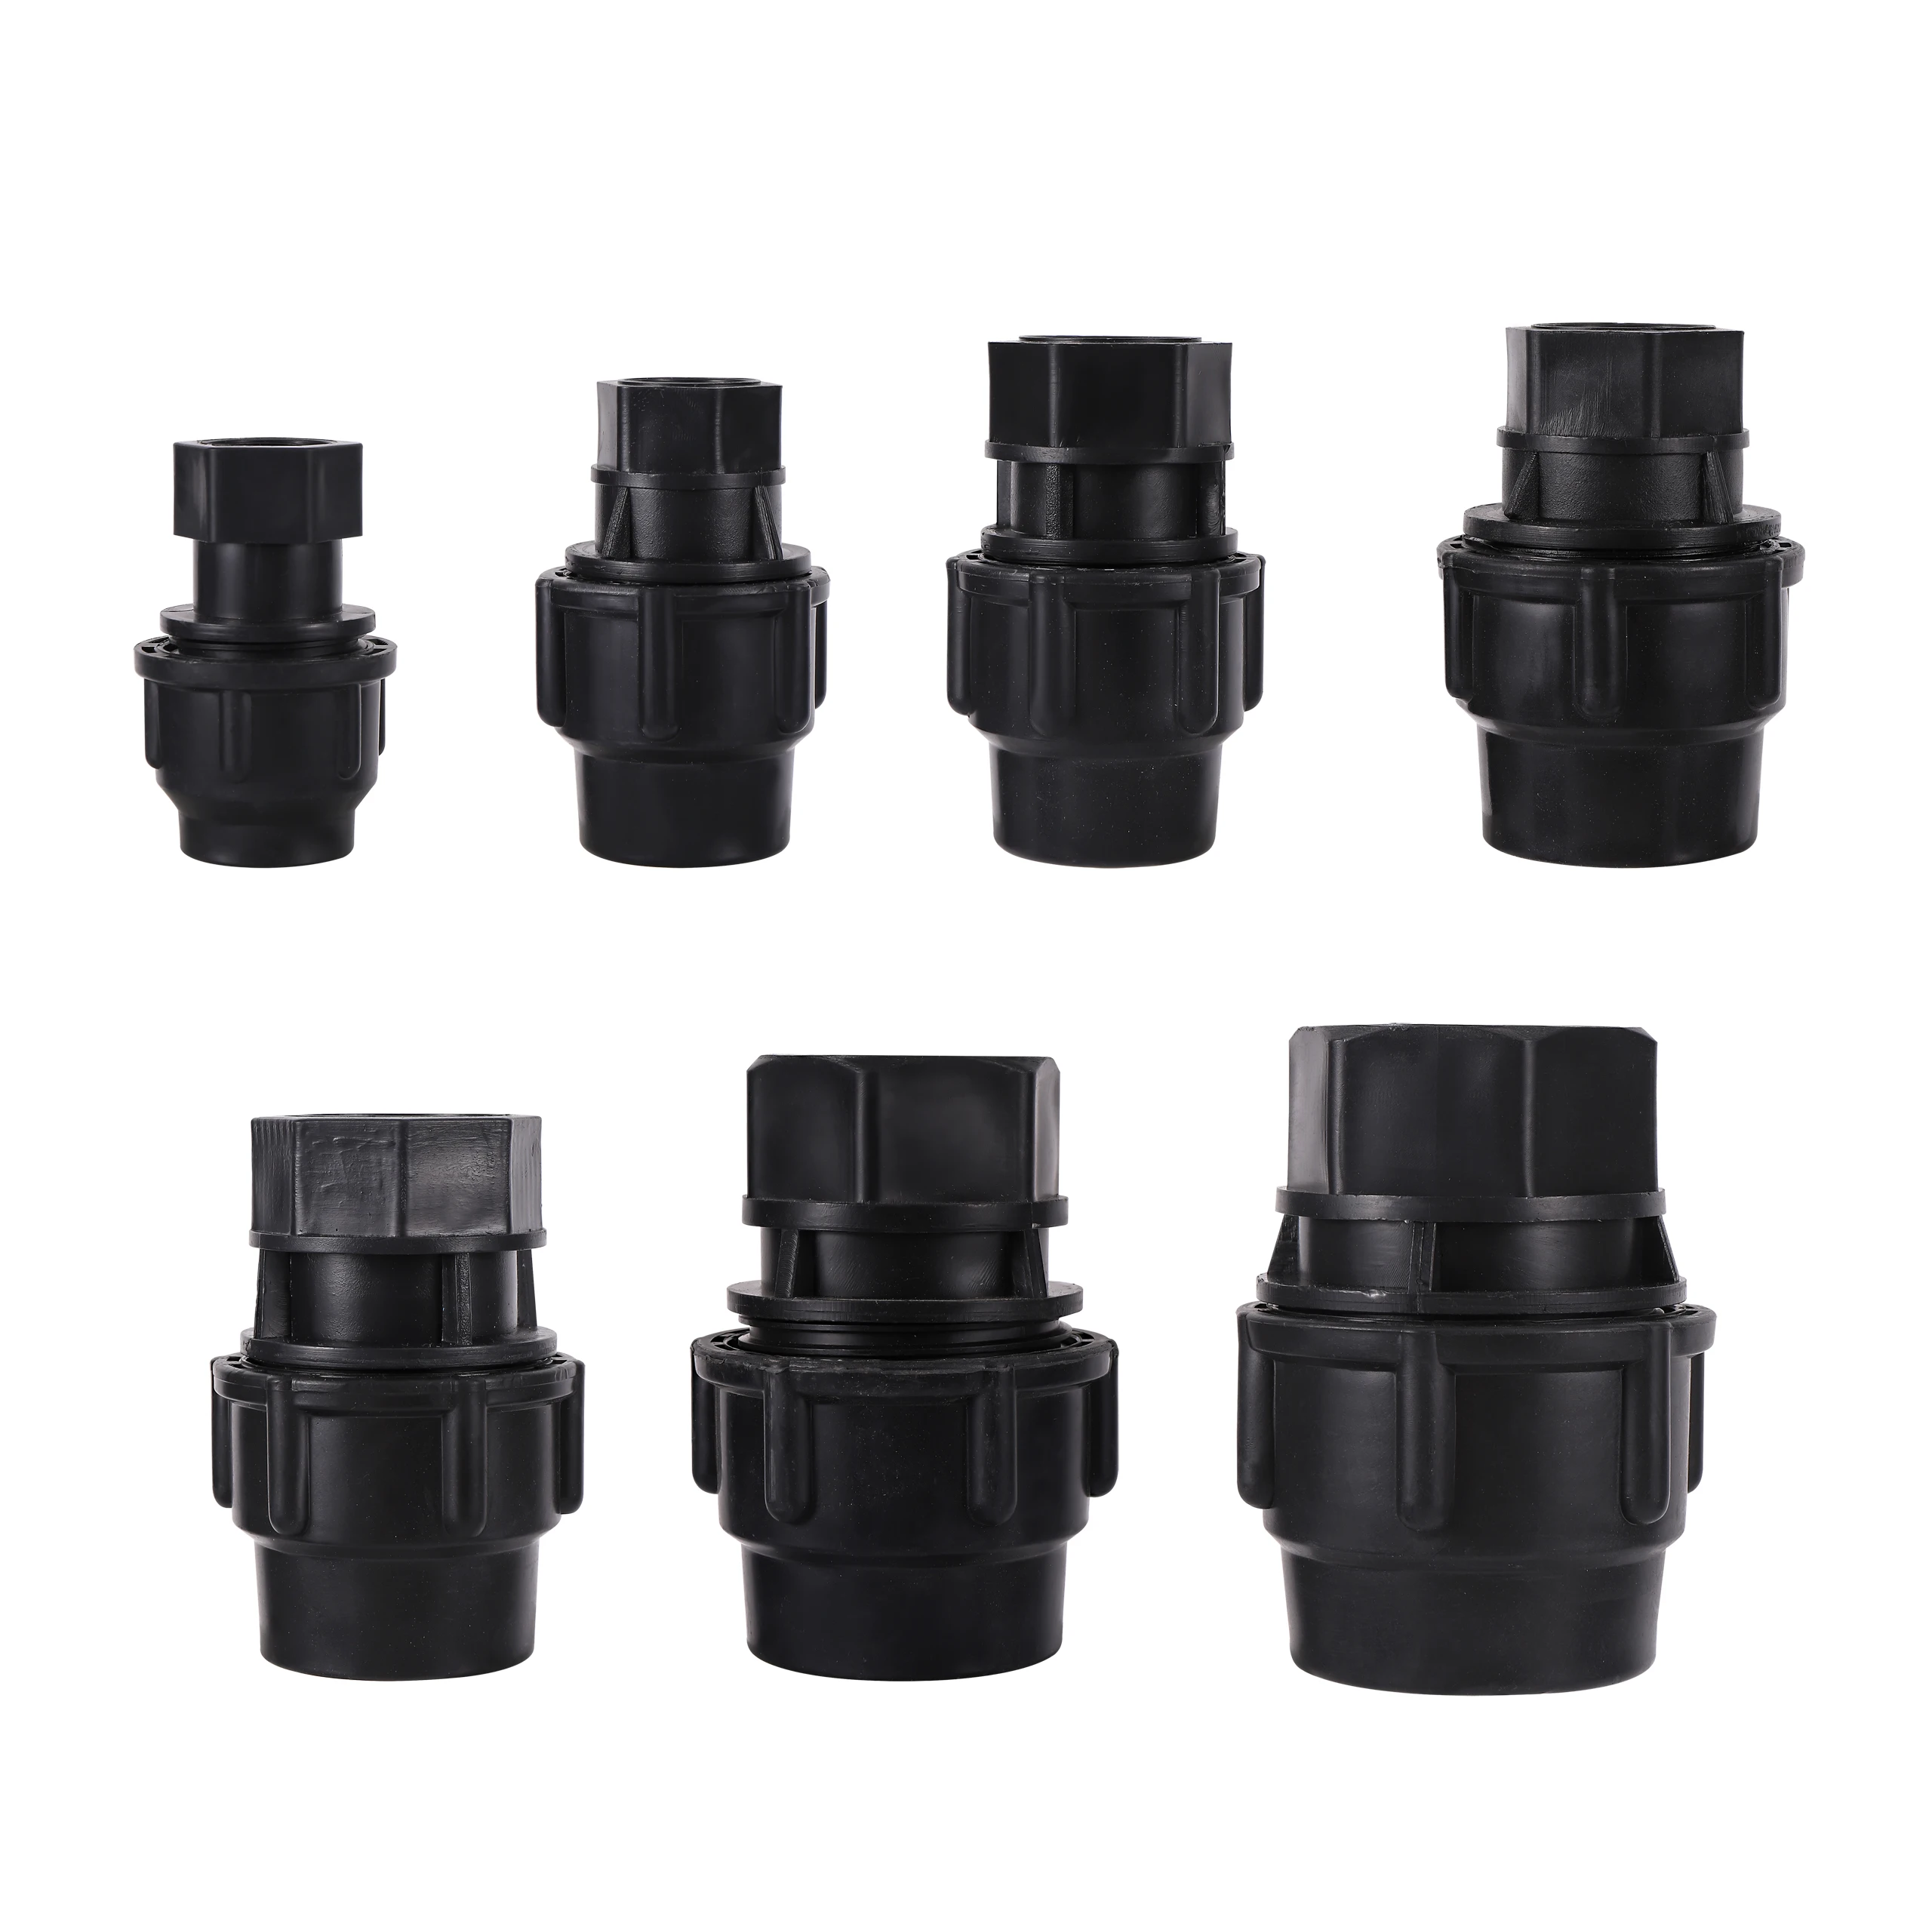 0.1-0.8mm Low Pressure Fine Misting Nozzles Disinfection landscaping Cooling Humidification Atomization Sprayers 3Pcs